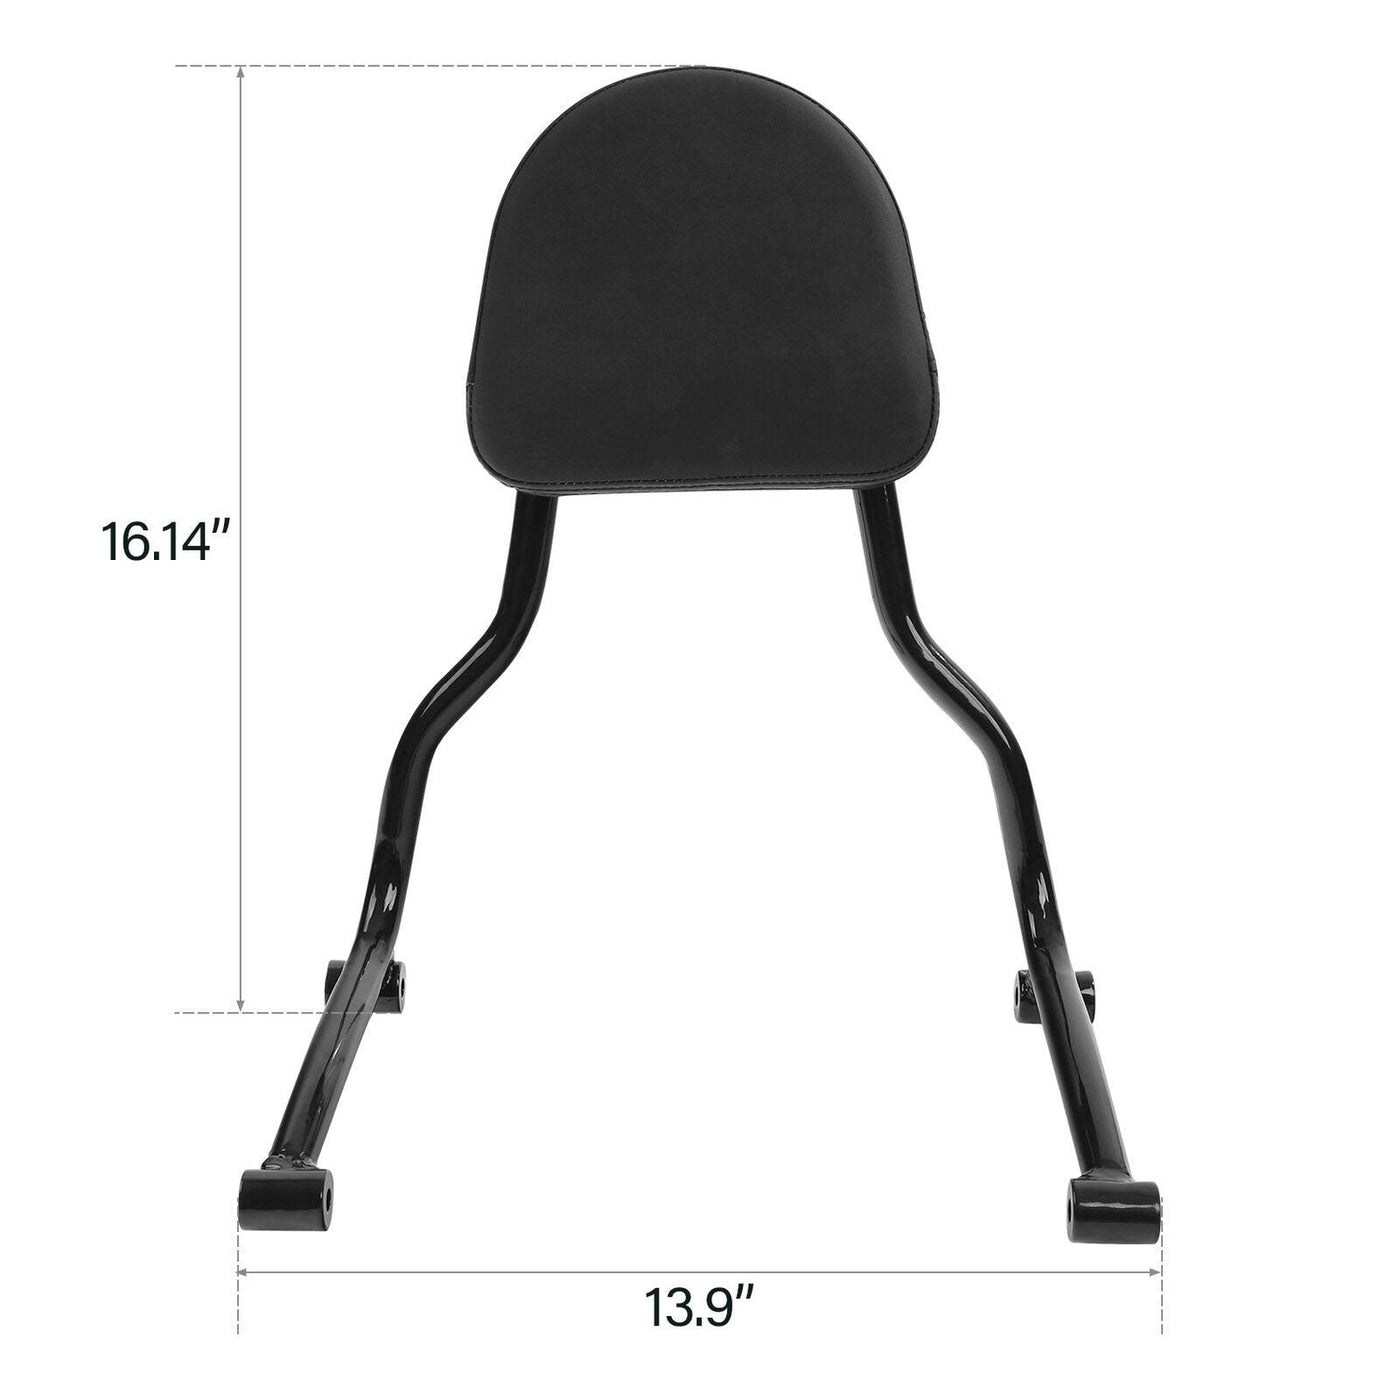 Gloss Black Rear Passenger Backrest Sissy Bar Fit For BMW R18 2020-later - Moto Life Products